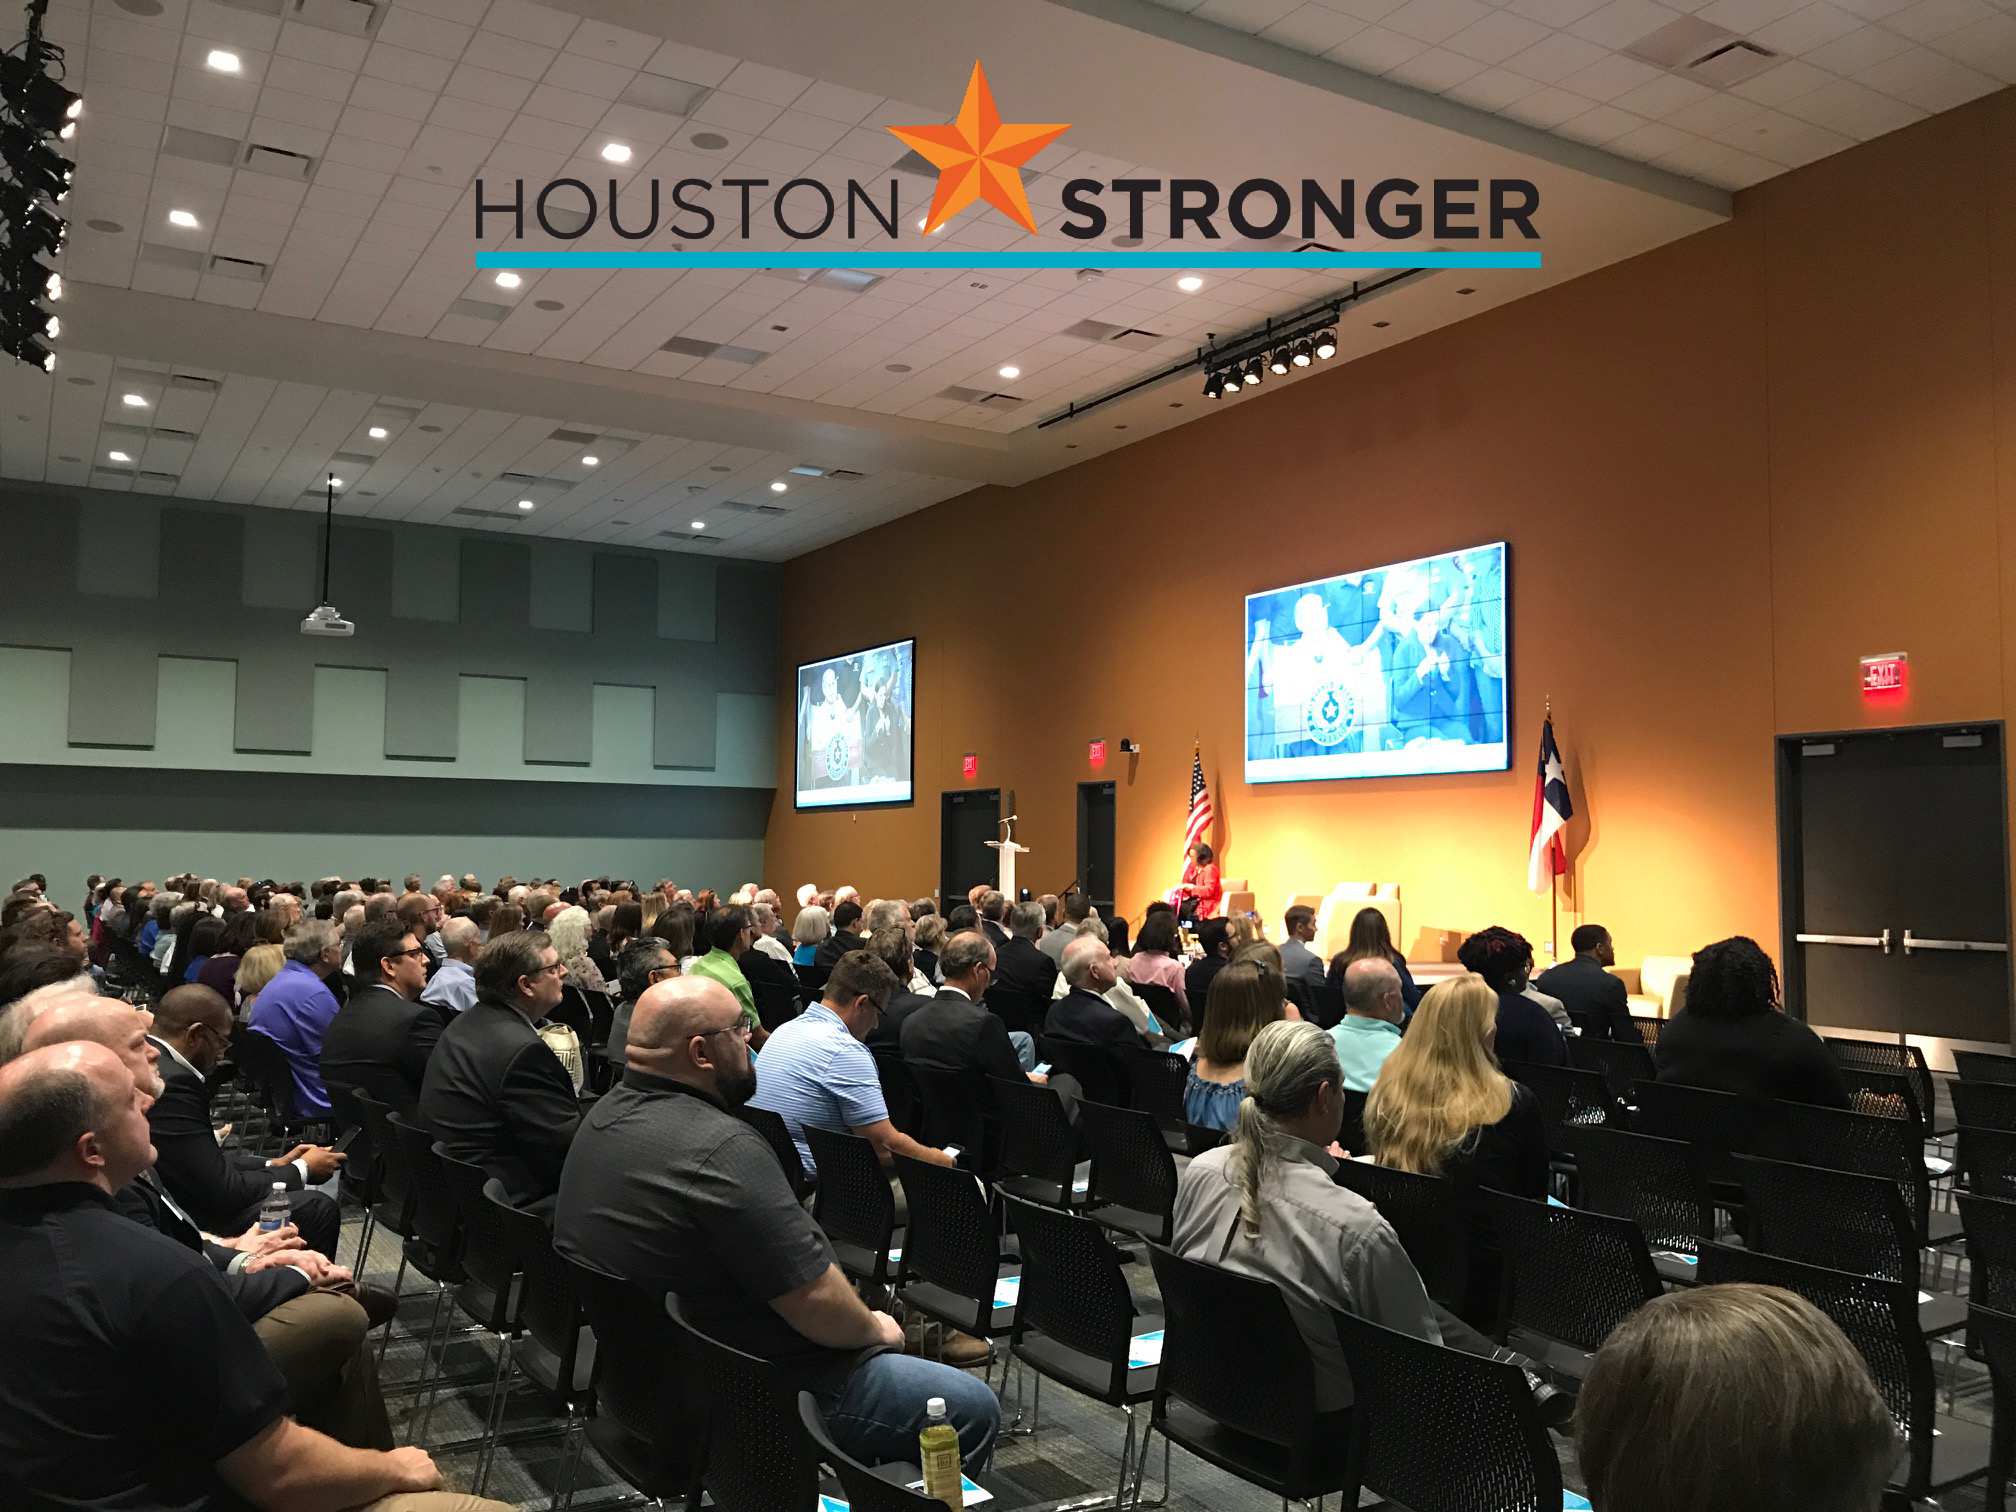 The Houston Stronger Conference was a Success!